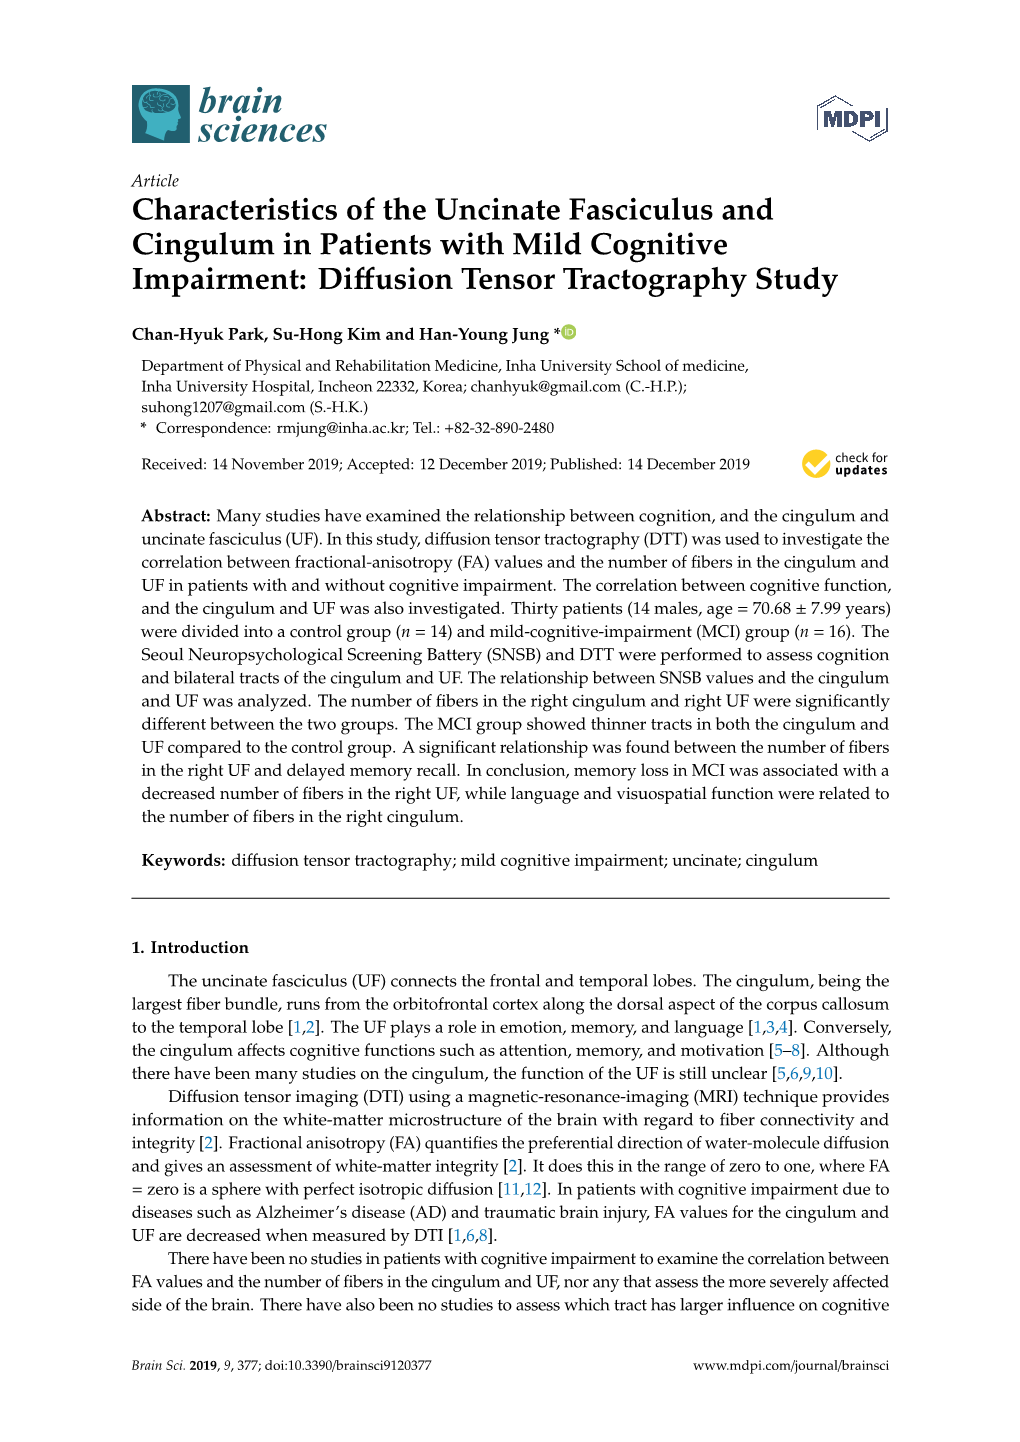 Characteristics of the Uncinate Fasciculus and Cingulum in Patients with Mild Cognitive Impairment: Diﬀusion Tensor Tractography Study